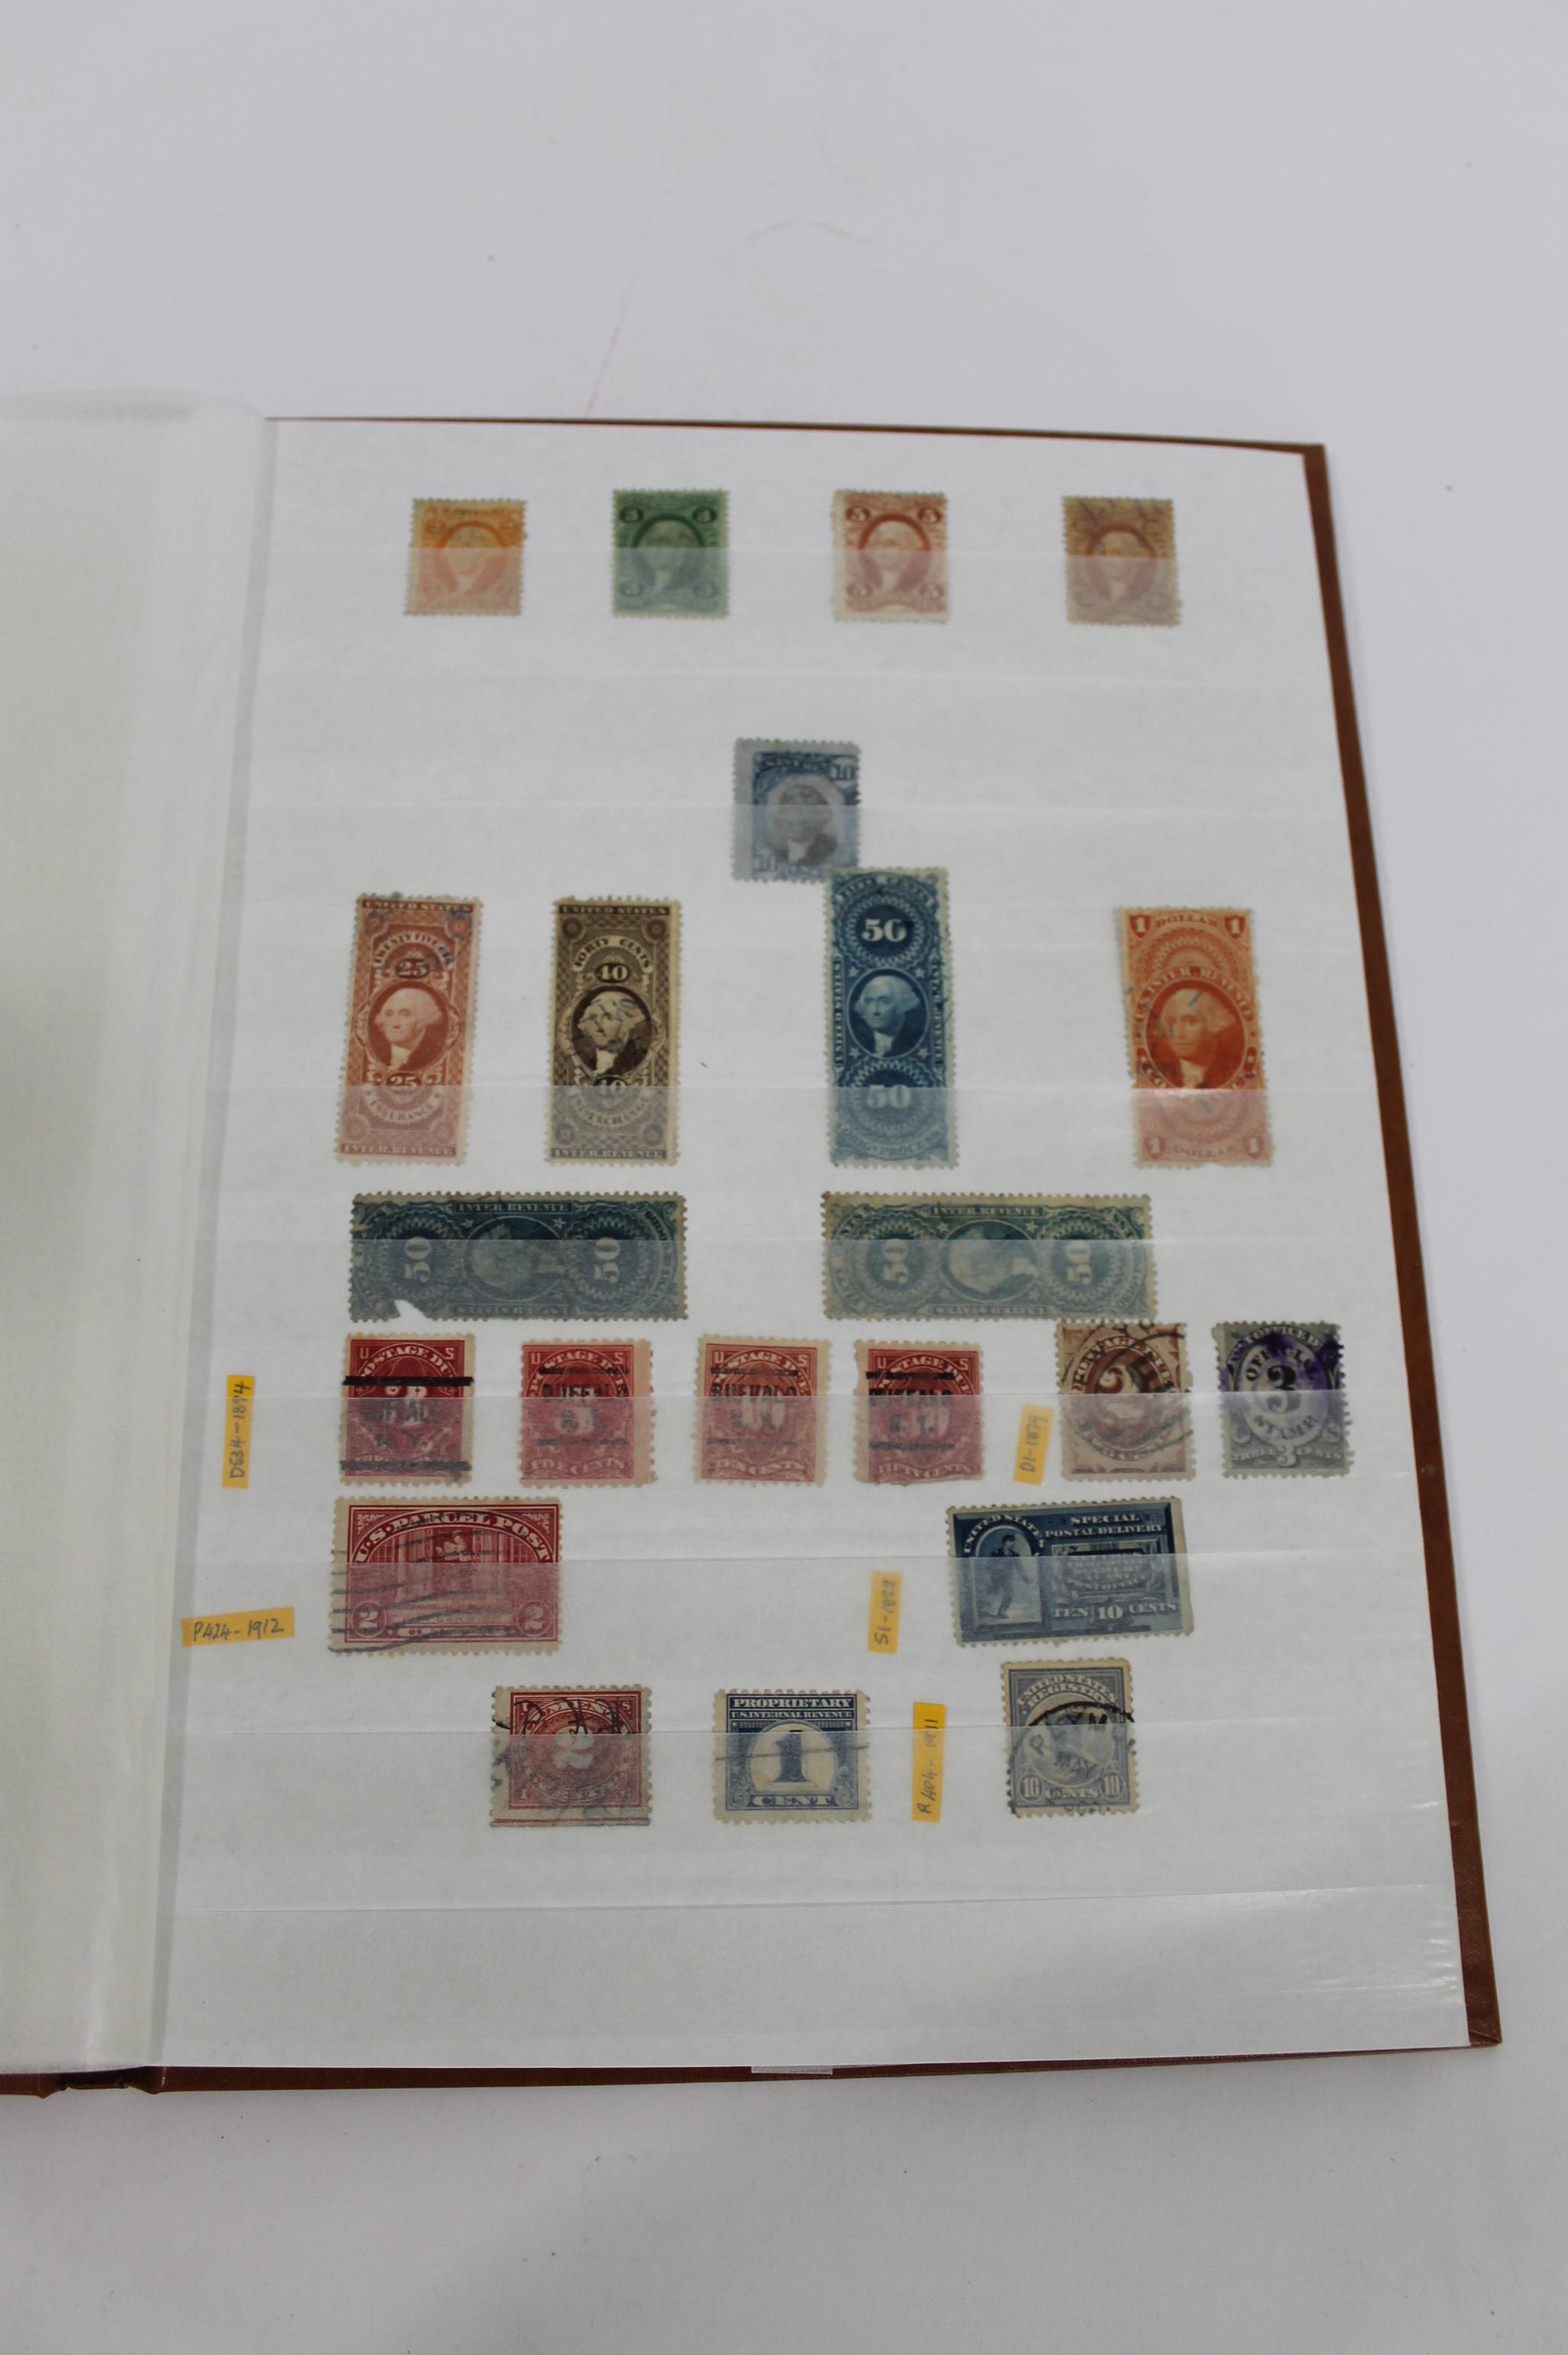 EUROPE & WORLD STAMPS 7 albums including 19th and 20thc used European stamps, Denmark, Finland, - Image 6 of 17